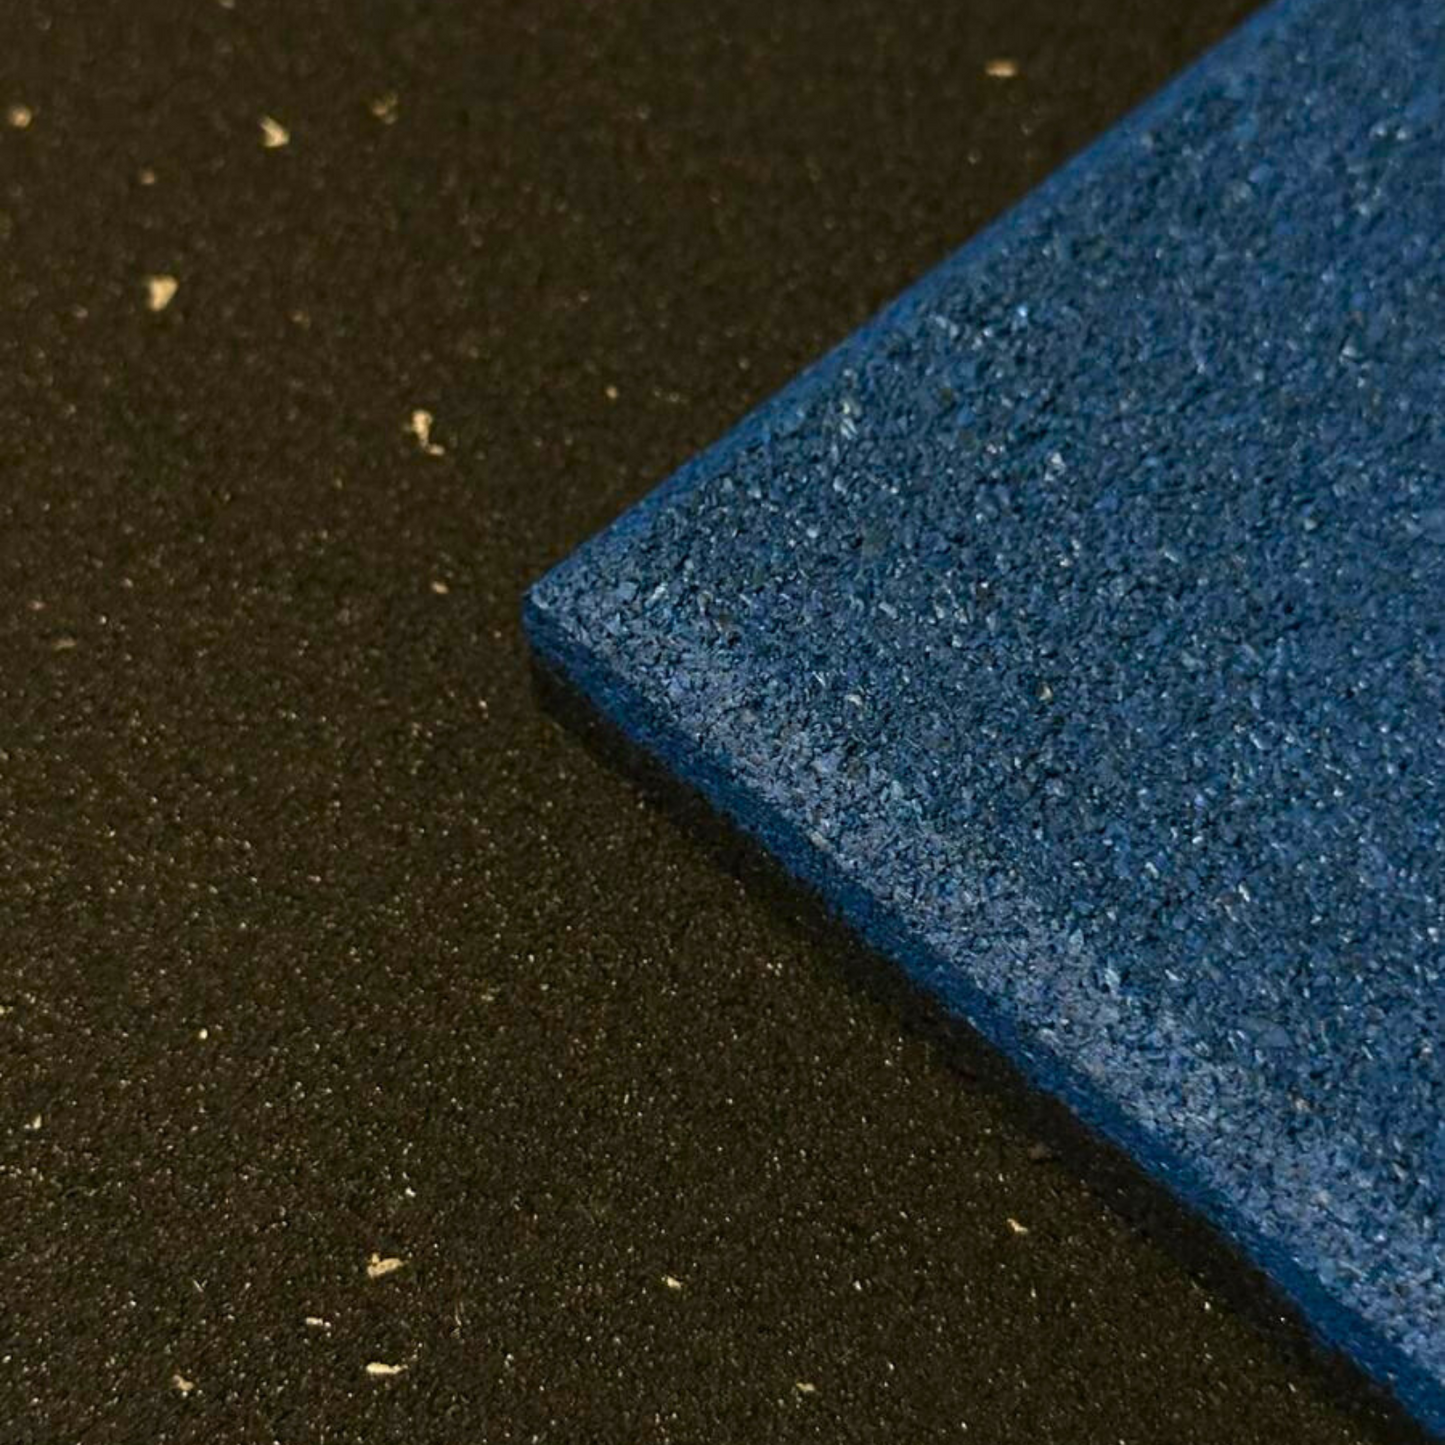 Commercial Rubber Gym Flooring - Blue (1000mm x 1000mm x 15mm)